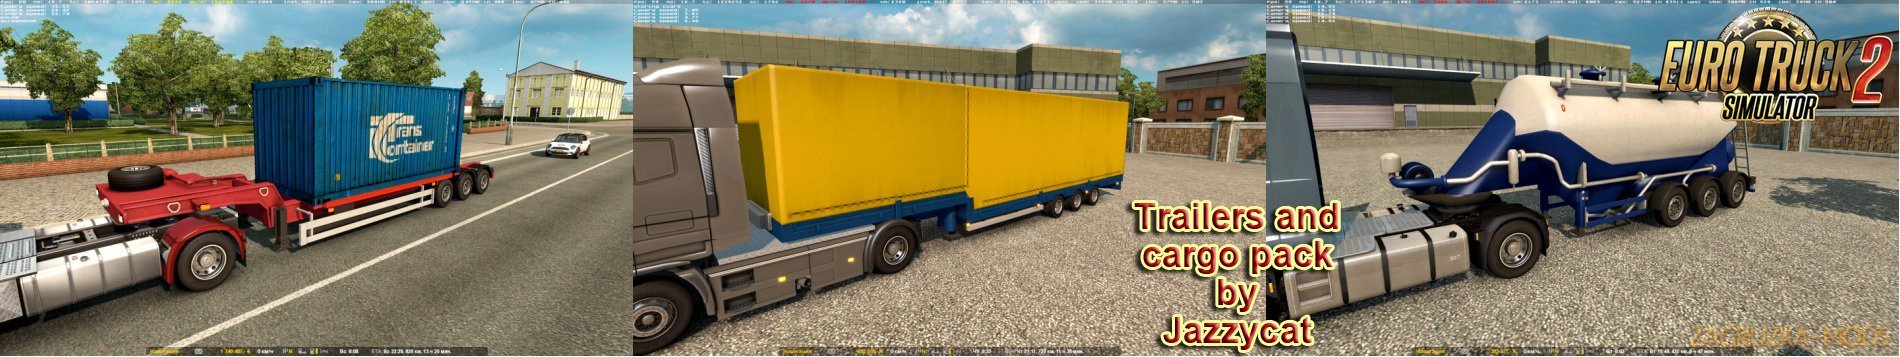 Trailers and Cargo Pack v5.3 by Jazzycat (1.27.x) for ETS 2